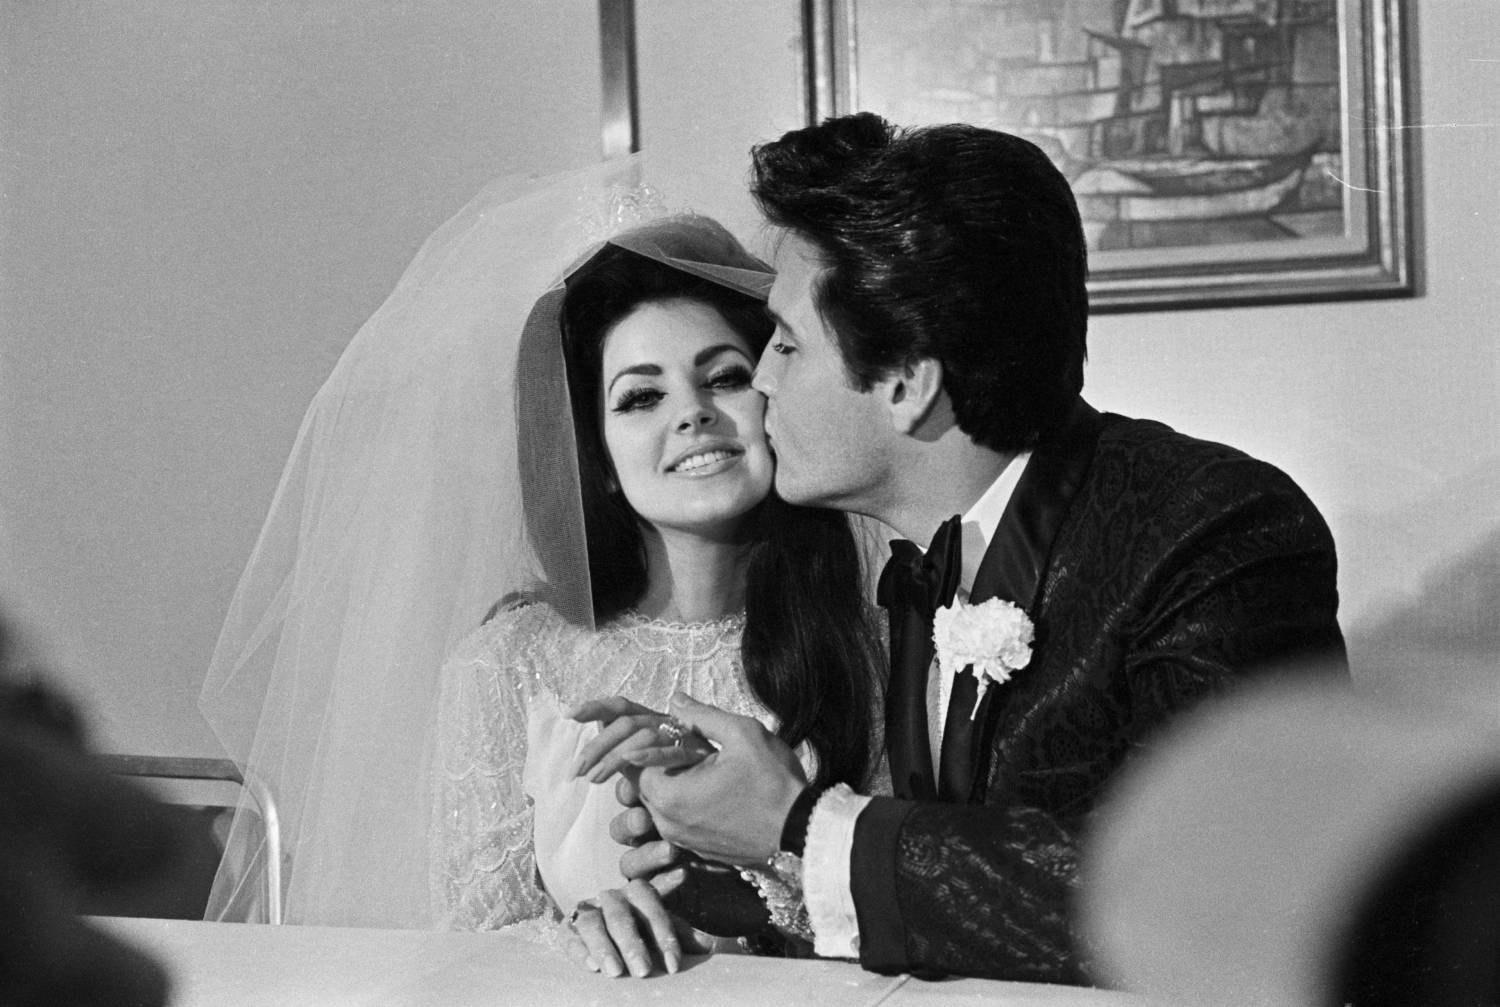 Las Vegas, NV: Elvis Presley gives his new bride, Priscilla Ann Beaulieu, a kiss following their wedding. The bride wears a large diamond on her finger.